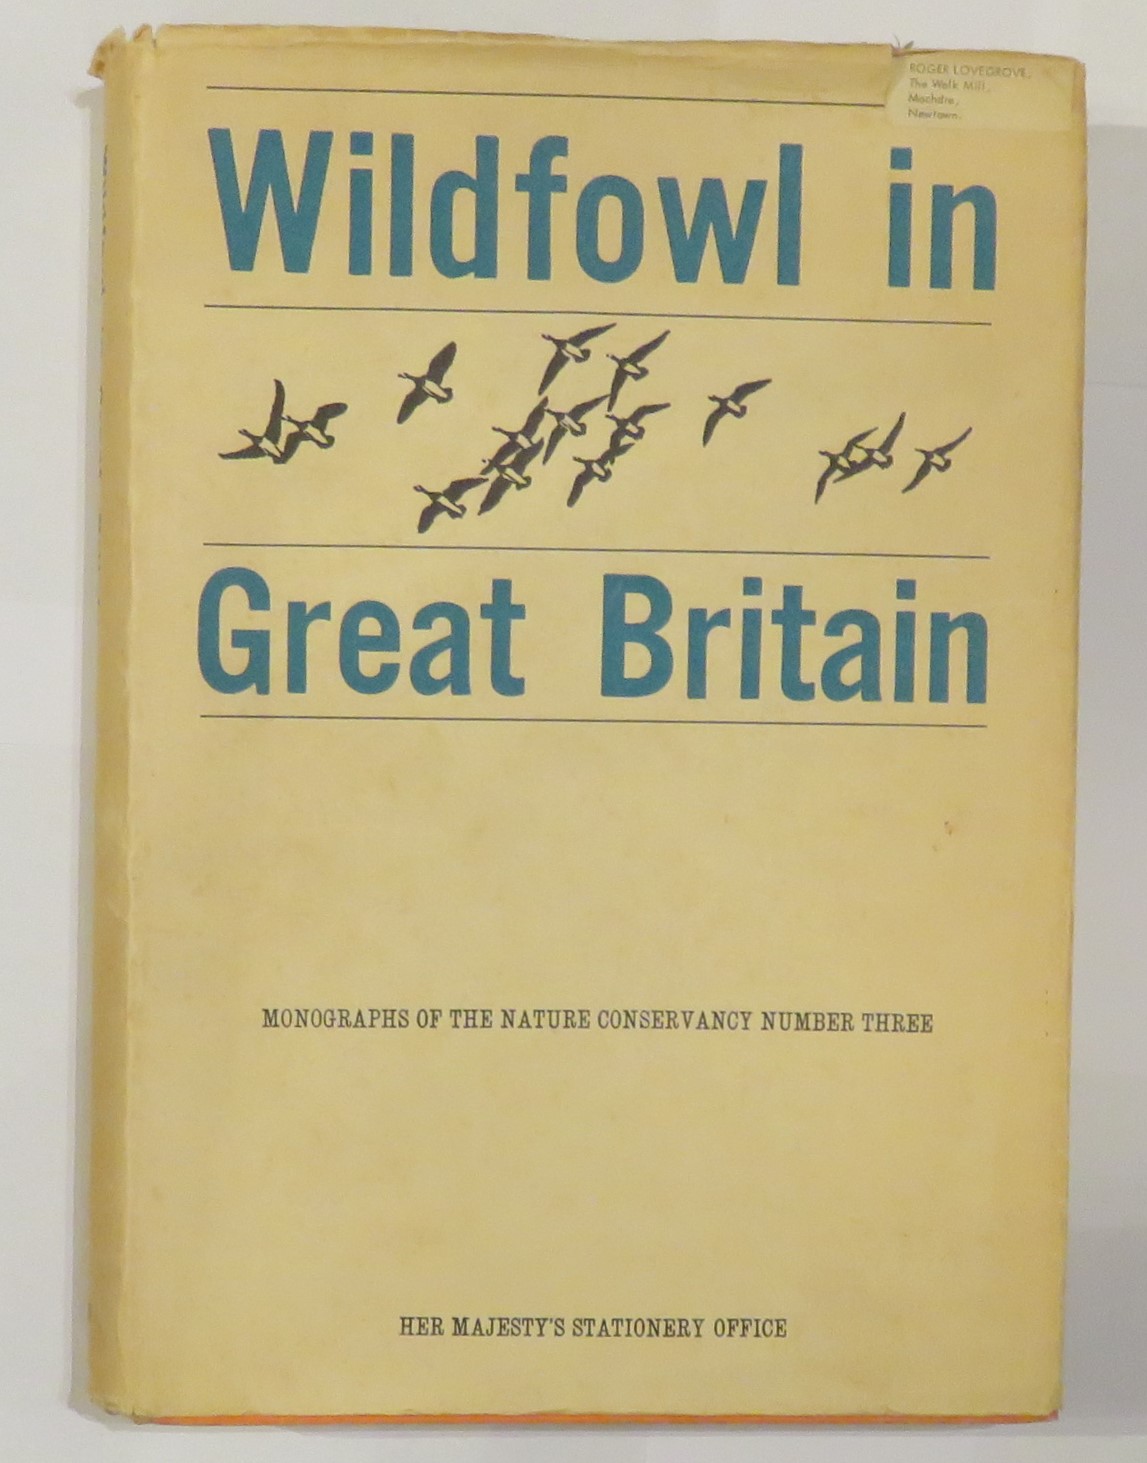 Monographs of the Nature Conservancy Number Three: Wildfowl in Great Britain